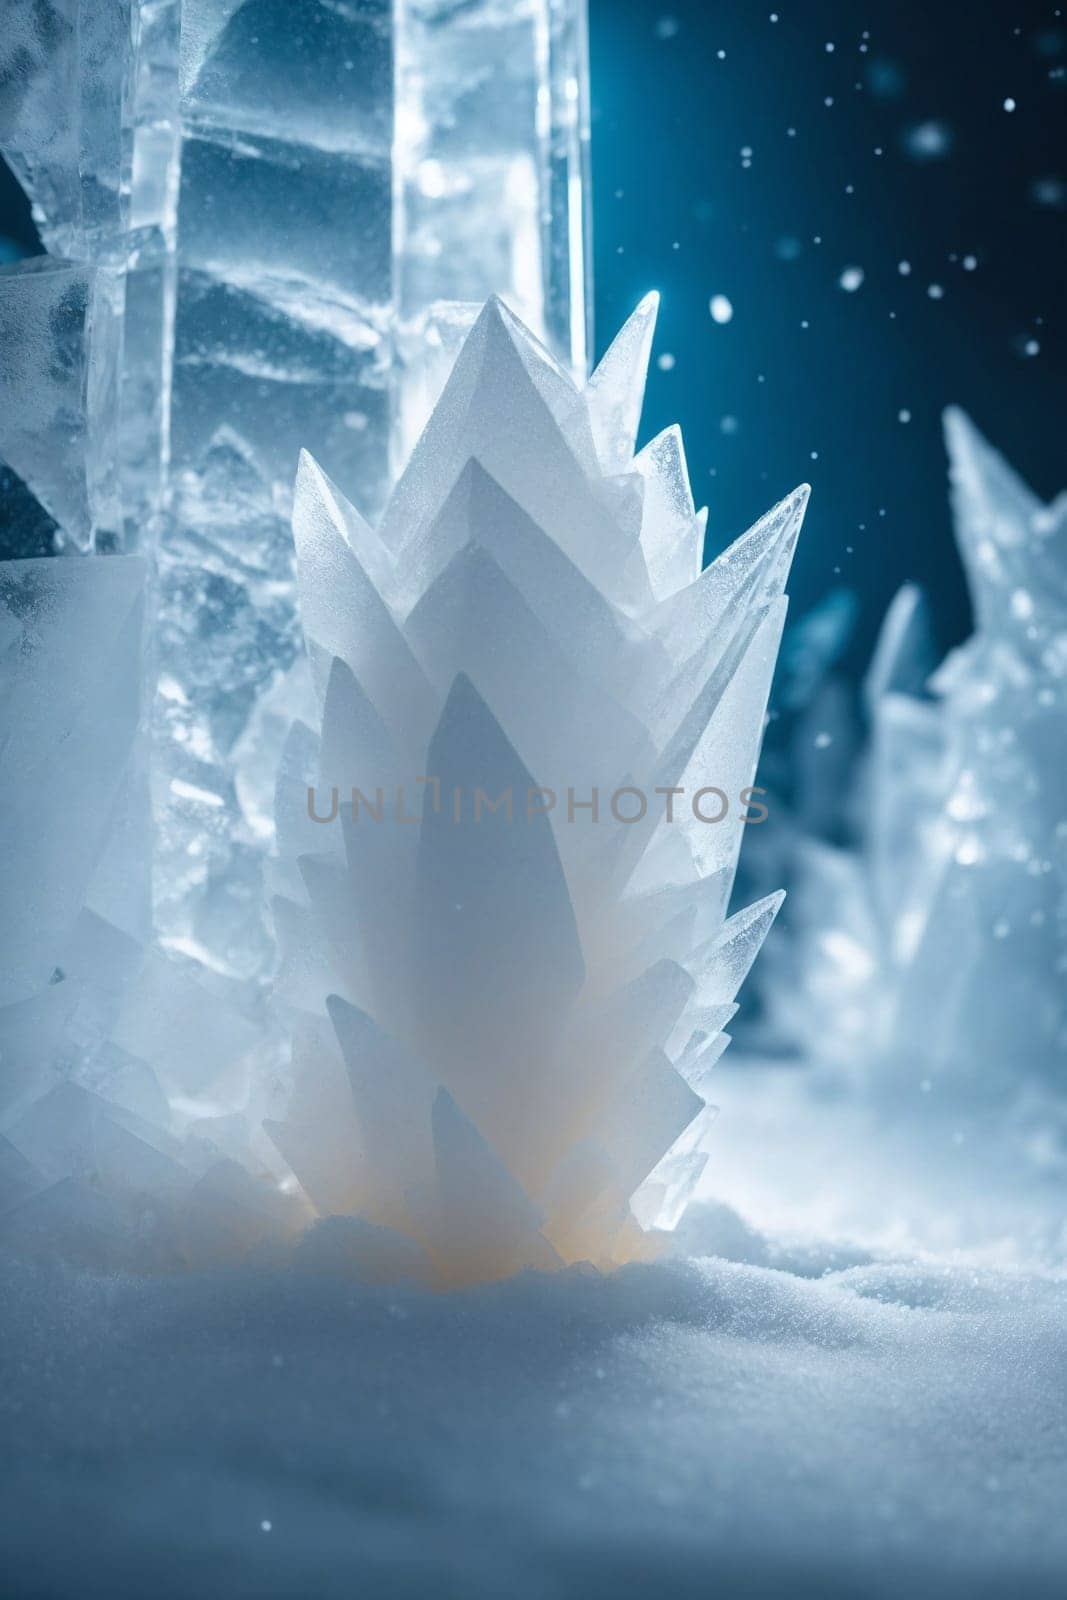 A detailed view of an ice sculpture surrounded by a snowy landscape.